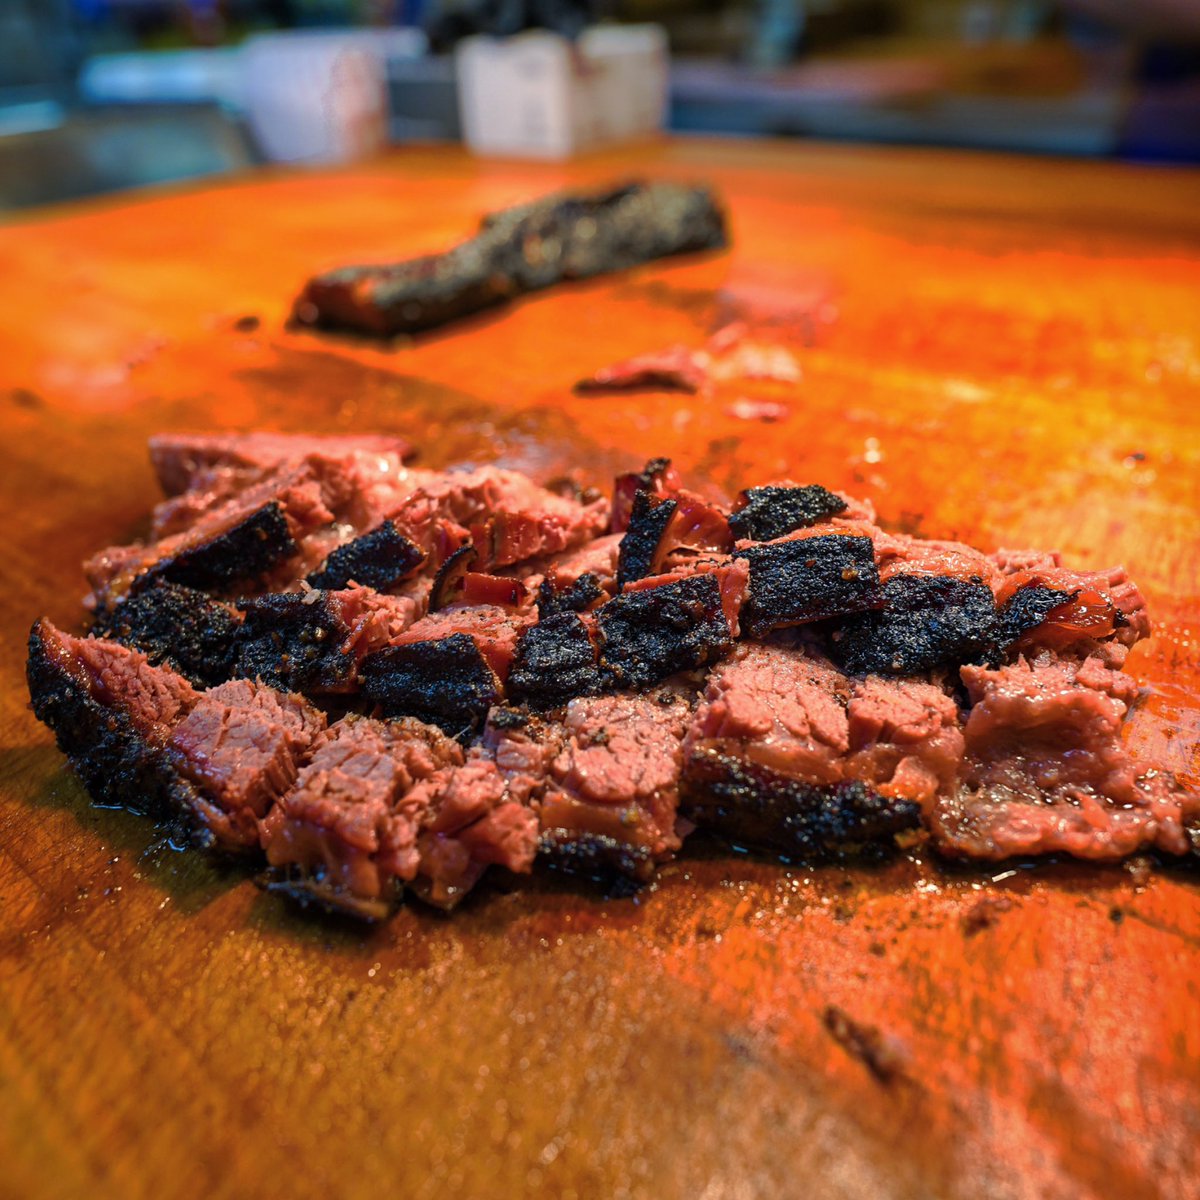 Sorry, didn’t mean to make you drool. 
See you tomorrow for lunch! 

#evolutionnotrevolution #houbbq #houstonfoodie #tmbbq #foodnetwork #teamgoofyque #houfood #bbq #topfoodnews #huffposttaste #cookingchannel #manfirefood #meatcandy #fulsheartexas #fulsheartx #supportlocal